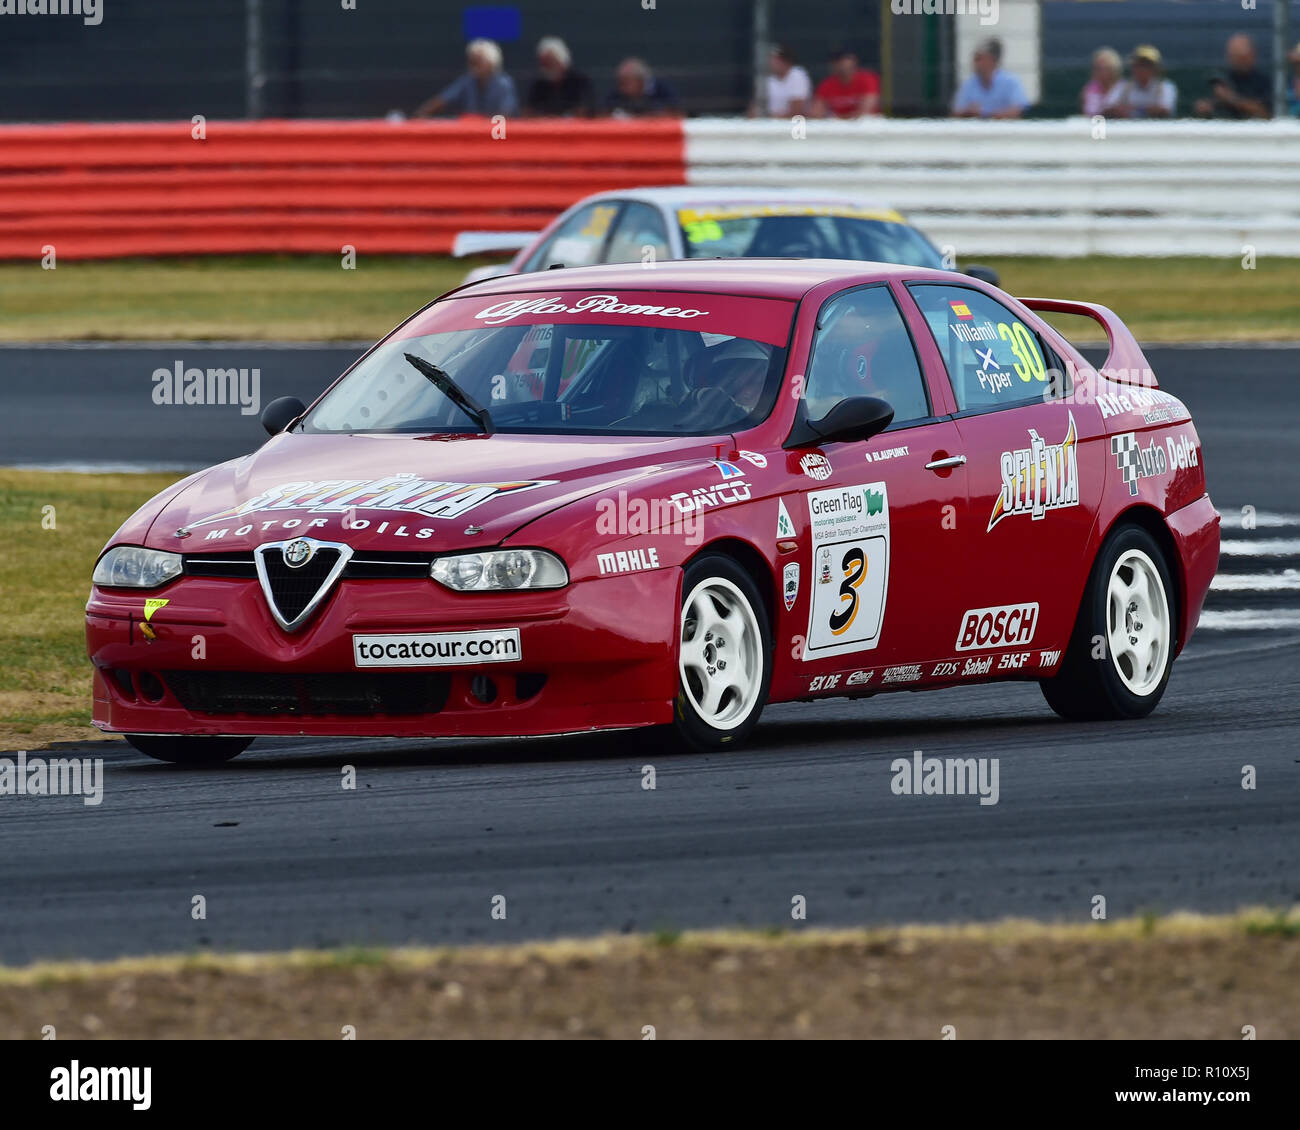 Gary Pearson, Alfa Romeo 156SP, Super Touring Trophy, Silverstone Classic, July 2018, Silverstone, Northamptonshire, England, circuit racing, cjm-phot Stock Photo